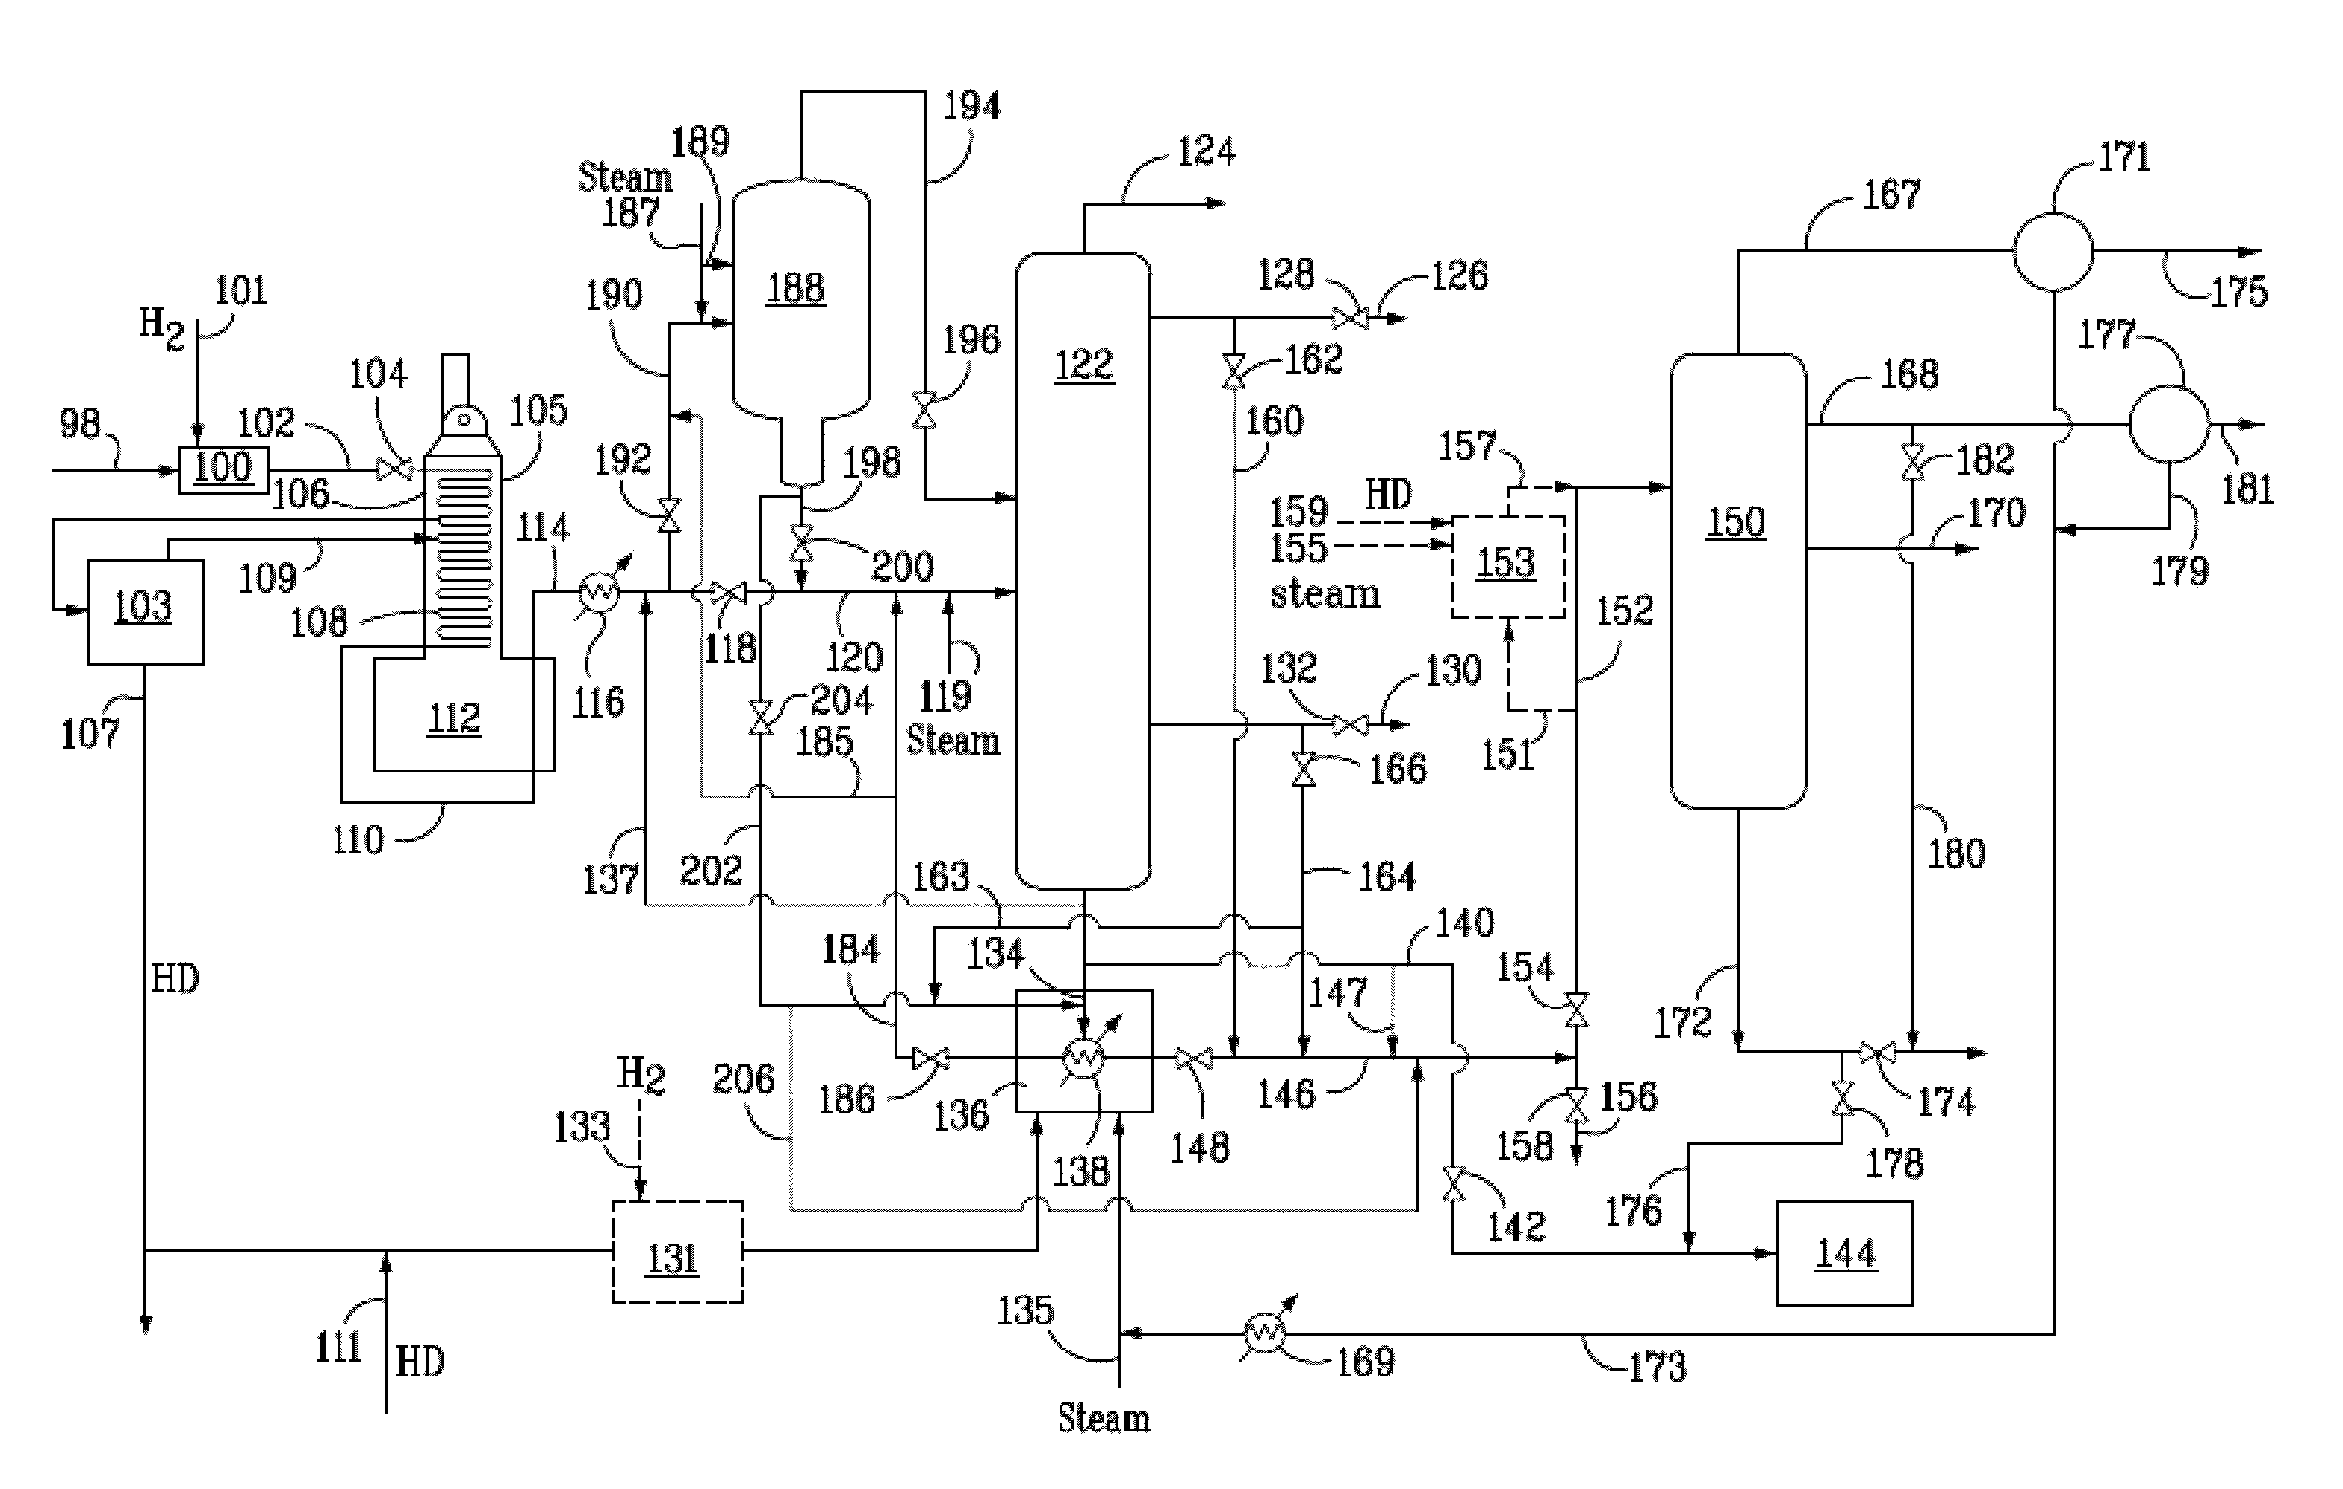 Process and apparatus for upgrading steam cracker tar using hydrogen donor compounds